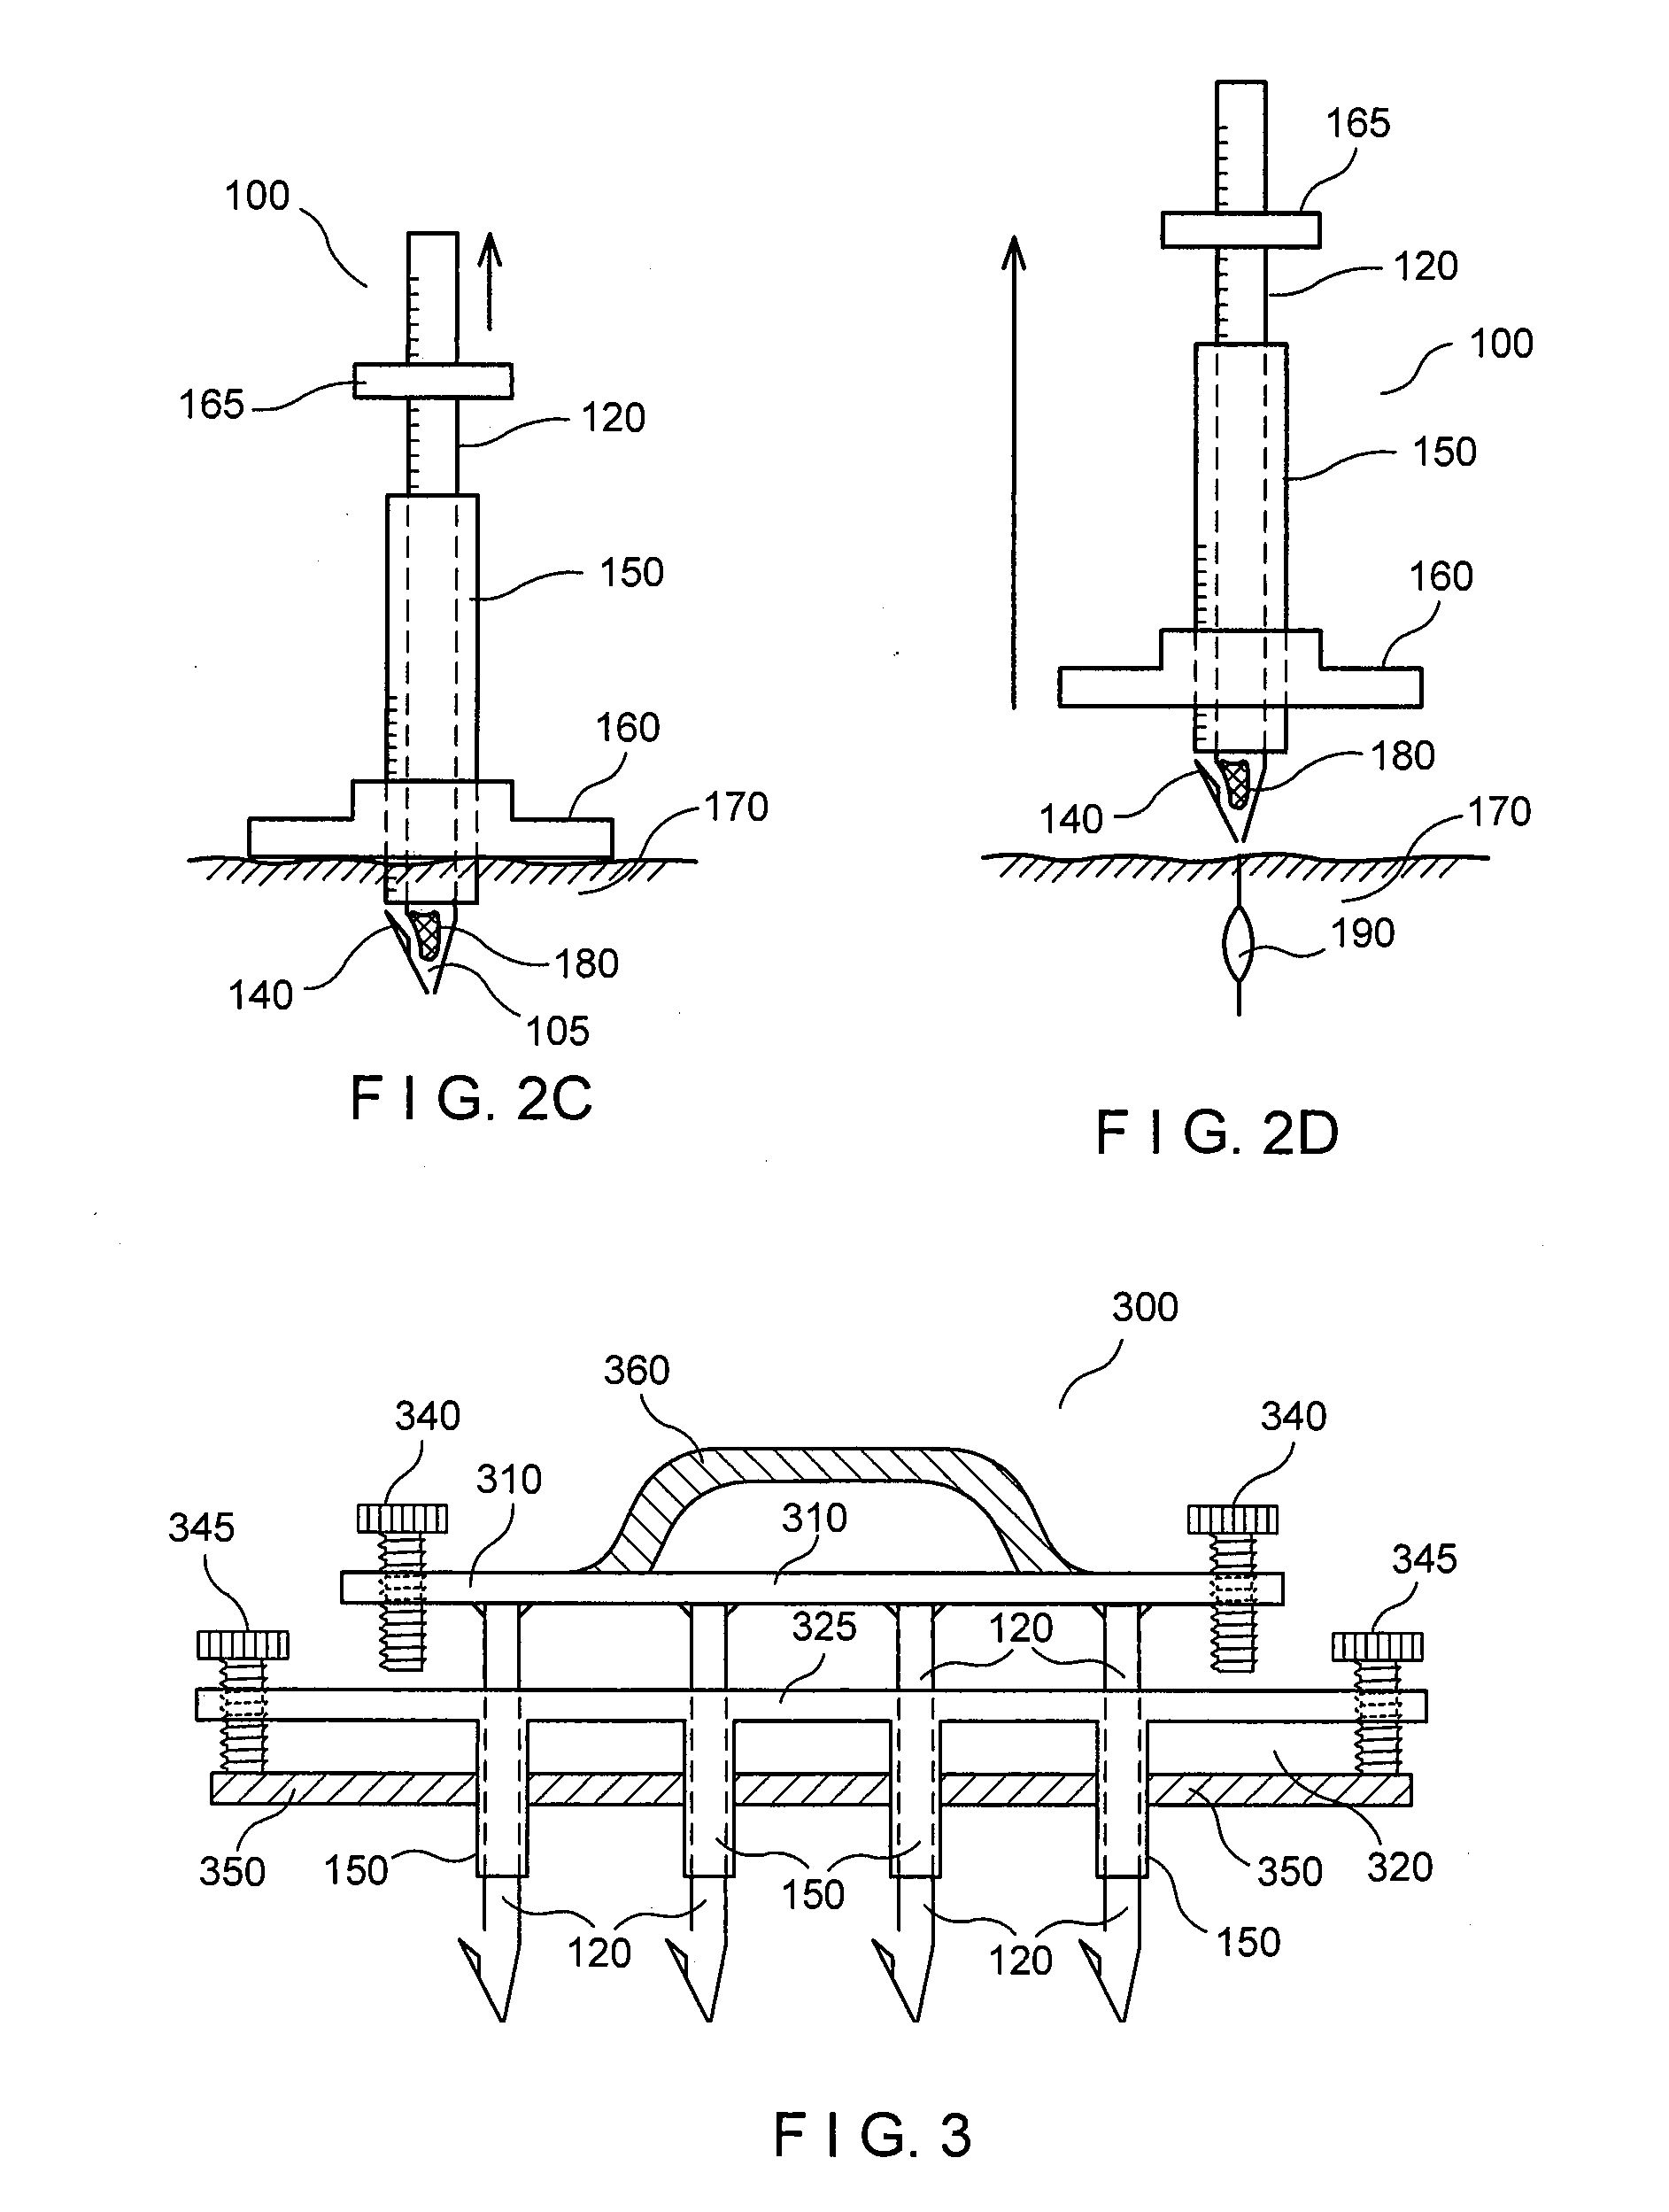 Method and apparatus for subsurface tissue sampling